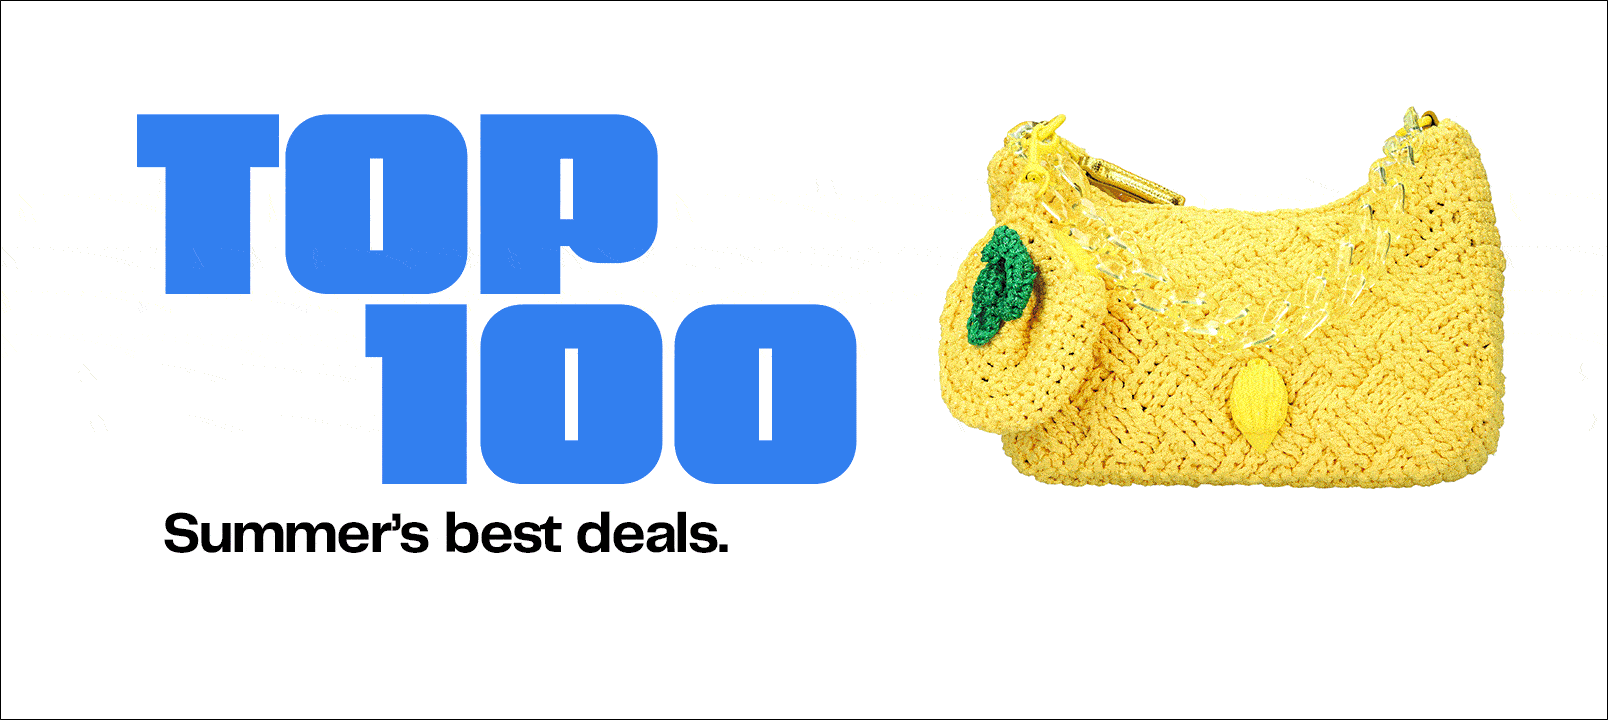 Top one hundred deals.